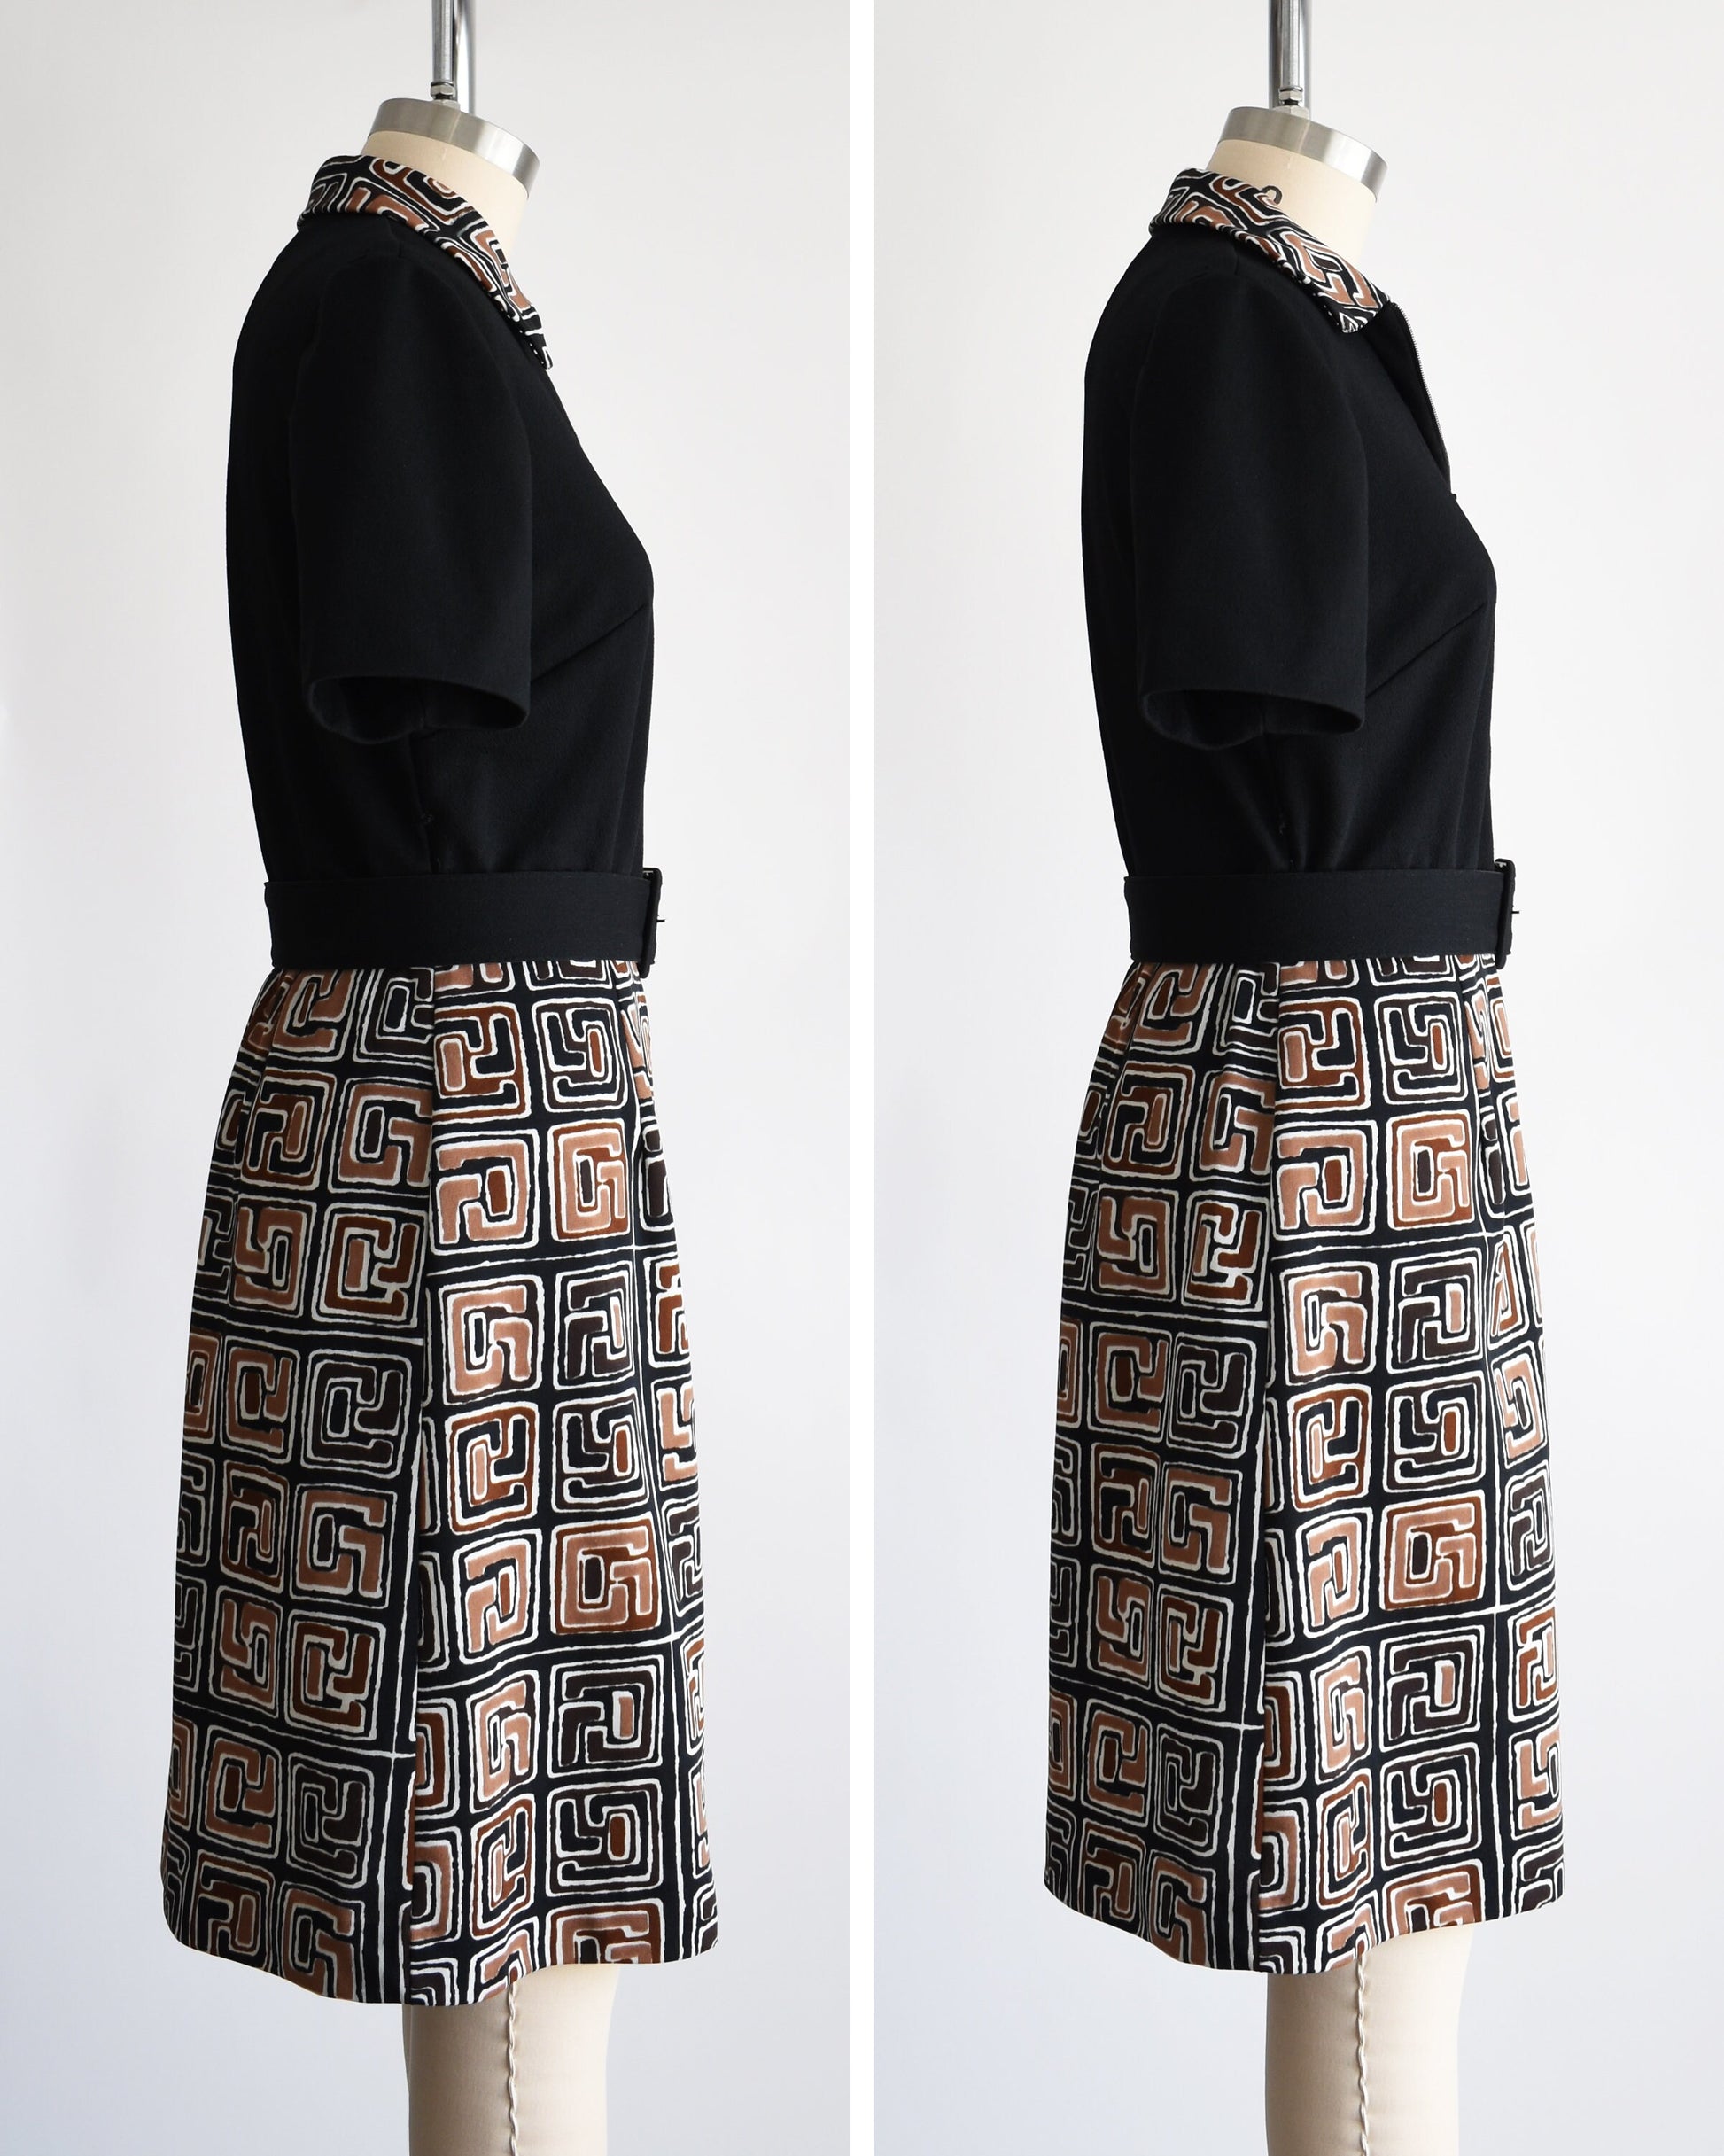 Side by side views of a  vintage 60s dress that has a matching geometric print brown, black and white collar and skirt. Zip up front. Matching black belt. Short sleeves. The dress is on a dress form. The left shows the dress zipped up all the way